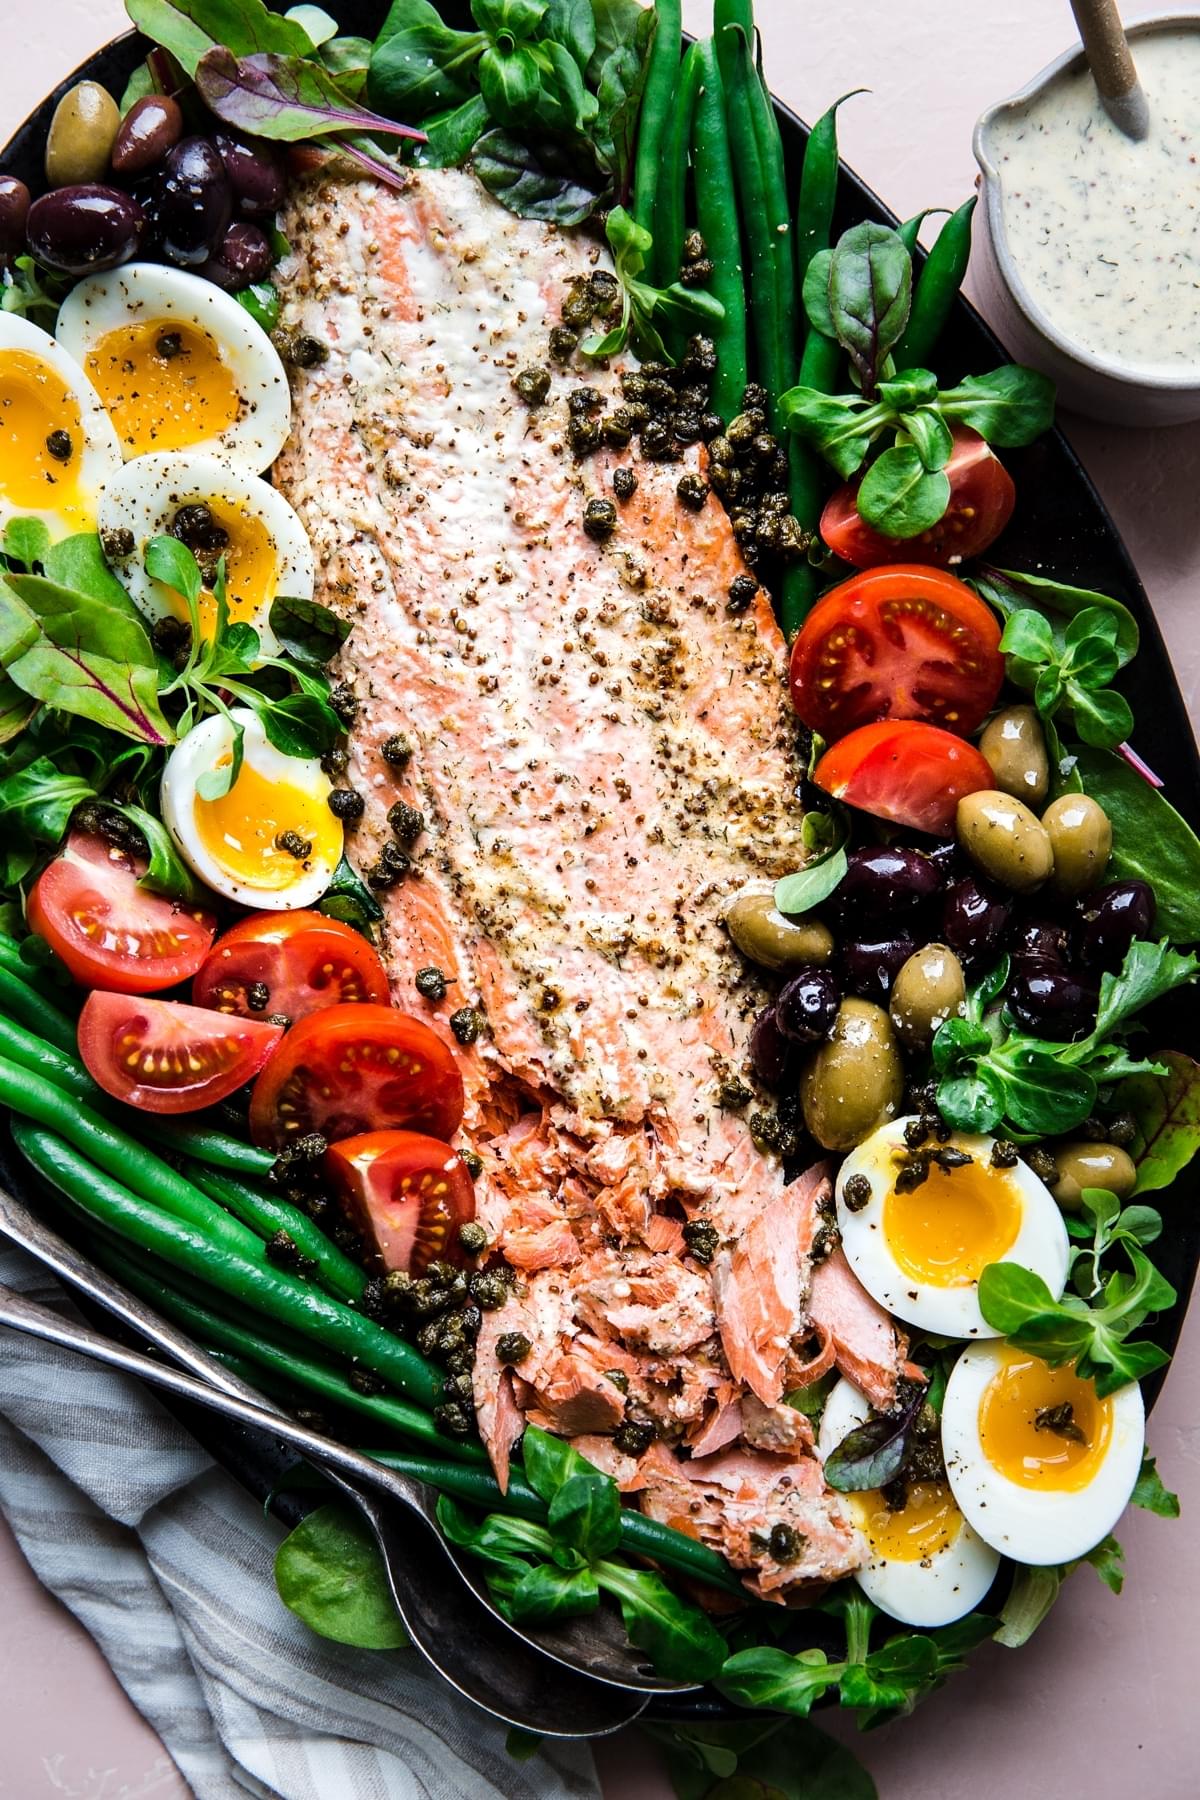 Salmon Niçoise Salad on a platter with olives, tomatoes, green beans, fried capers and soft boiled eggs.